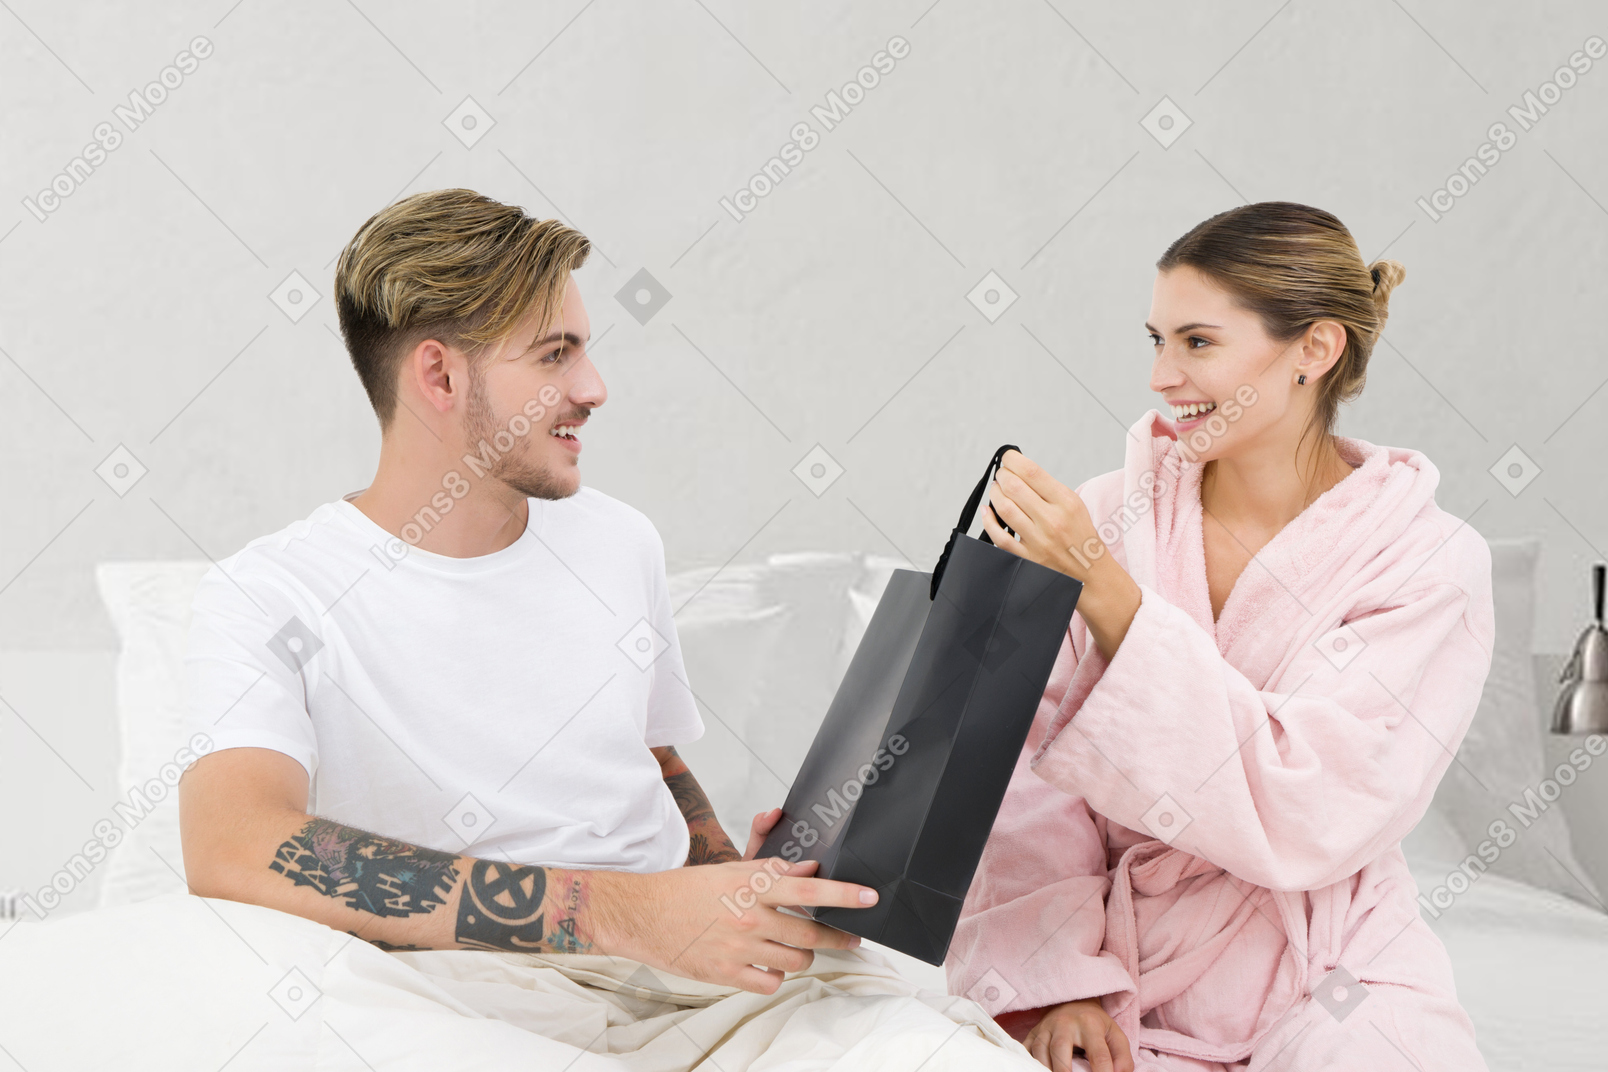 Woman giving man a gift